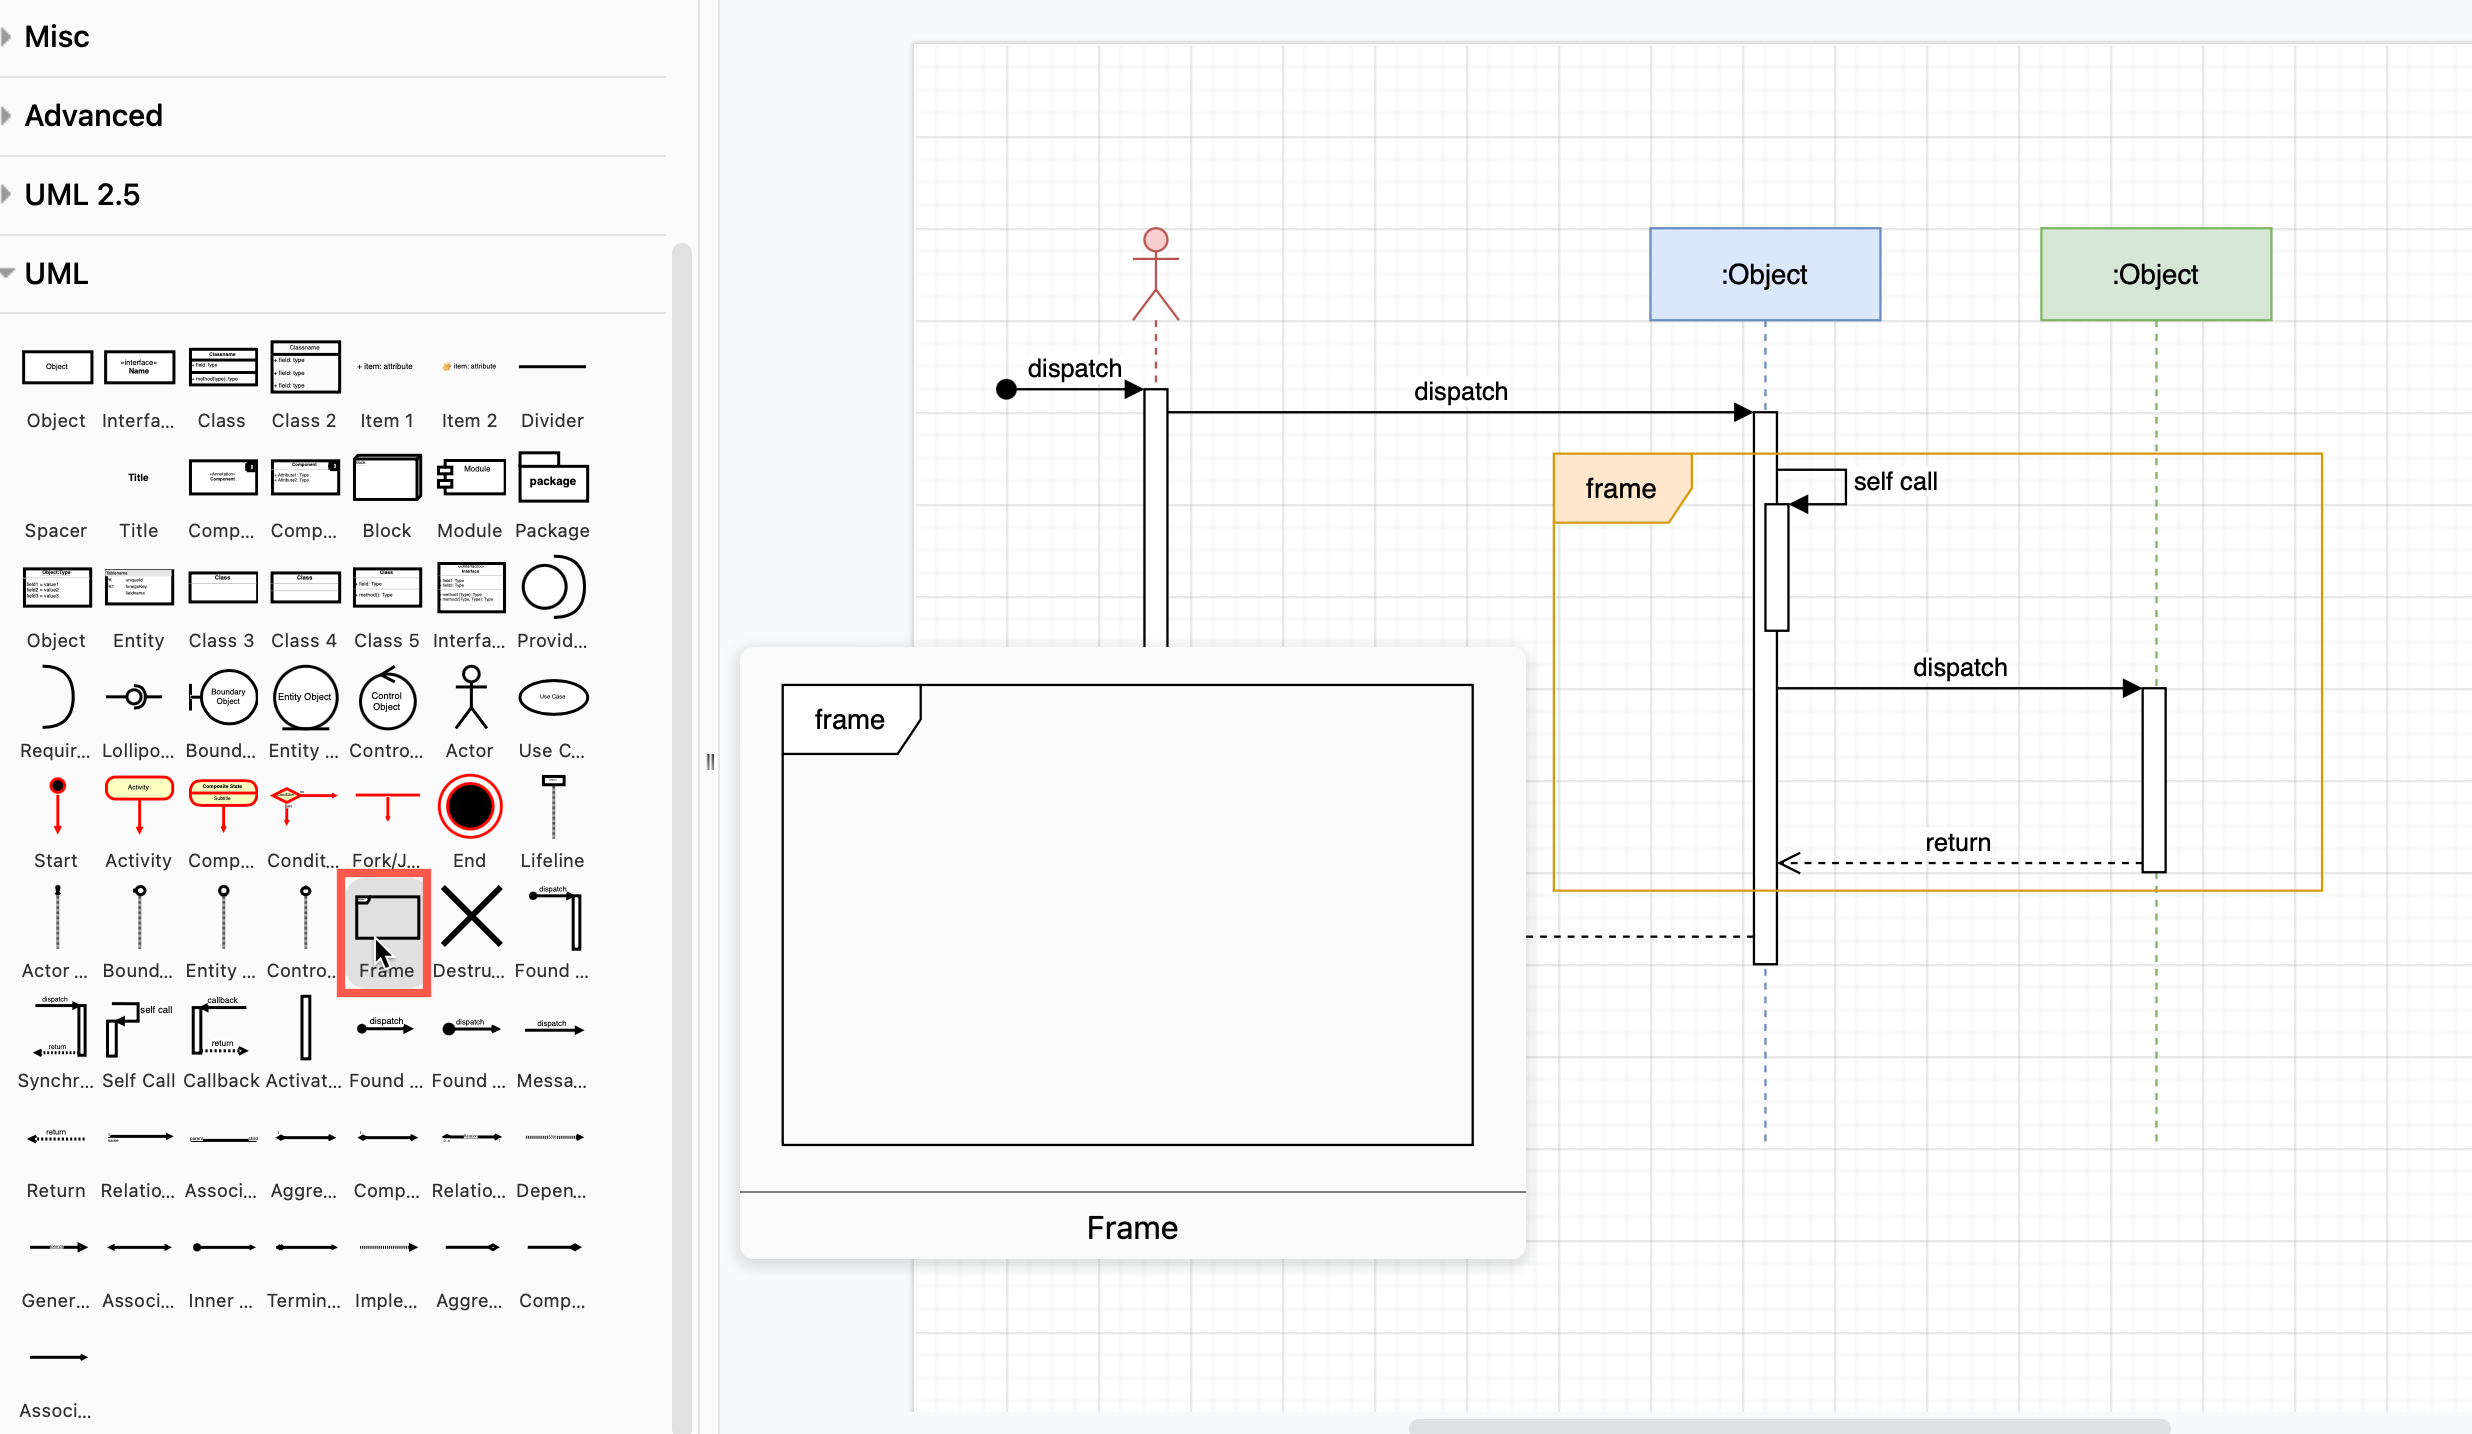 Use the Frame shape in the UML shape library to draw a sequence diagram in draw.io